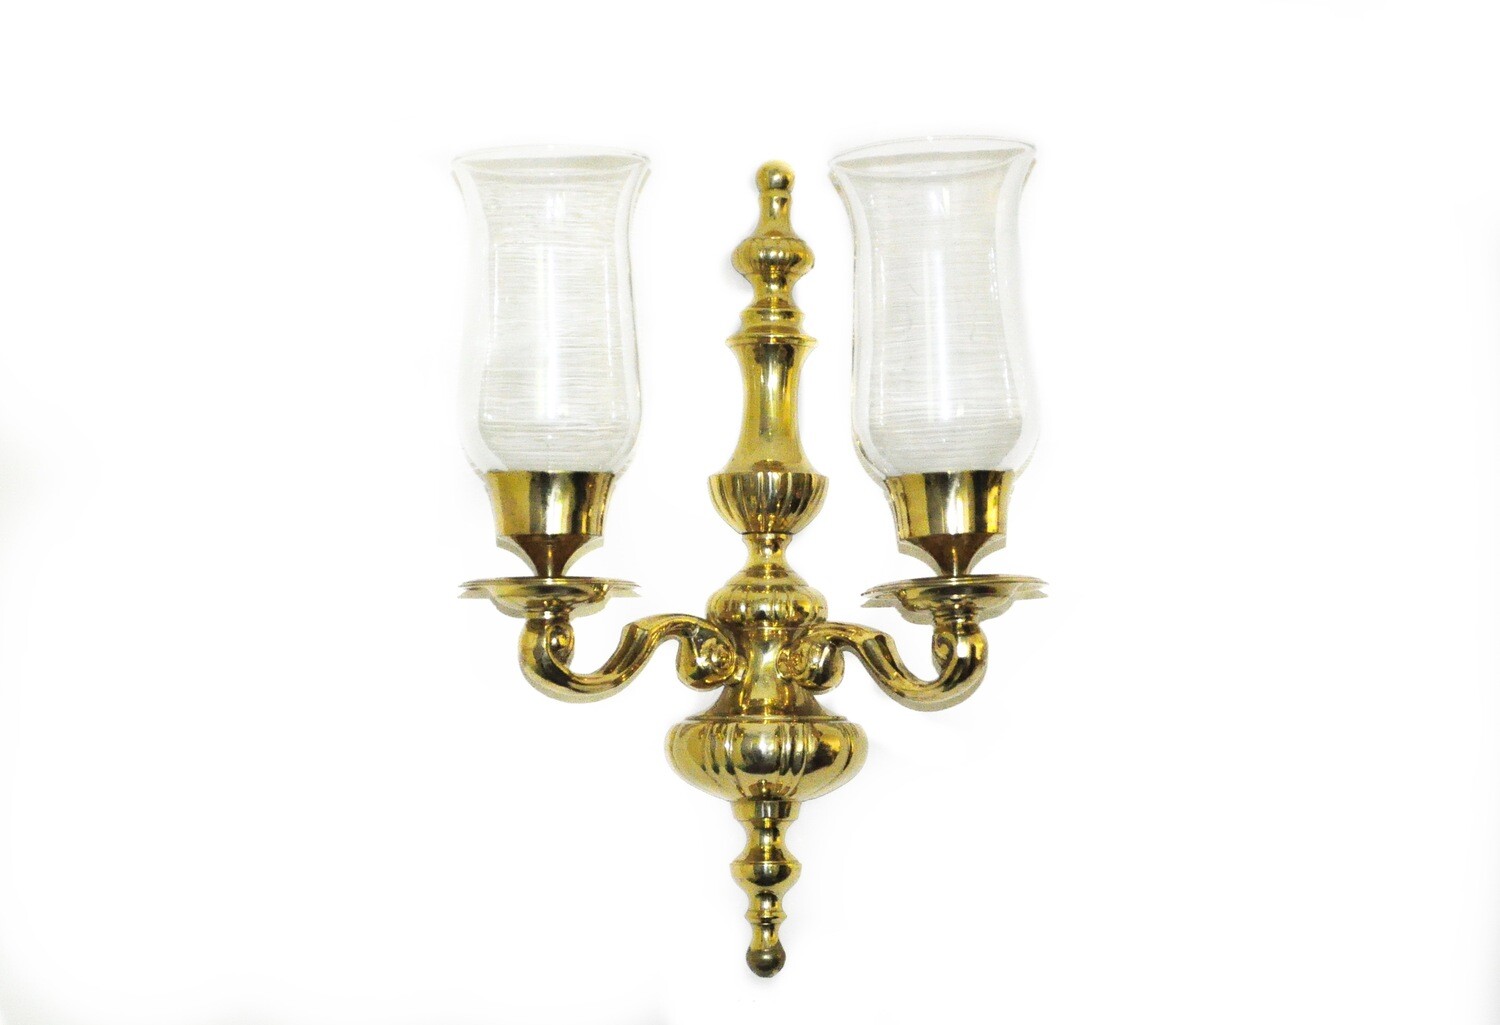 2 Stunning Brass Candle Wall Sconces with Glass Shades